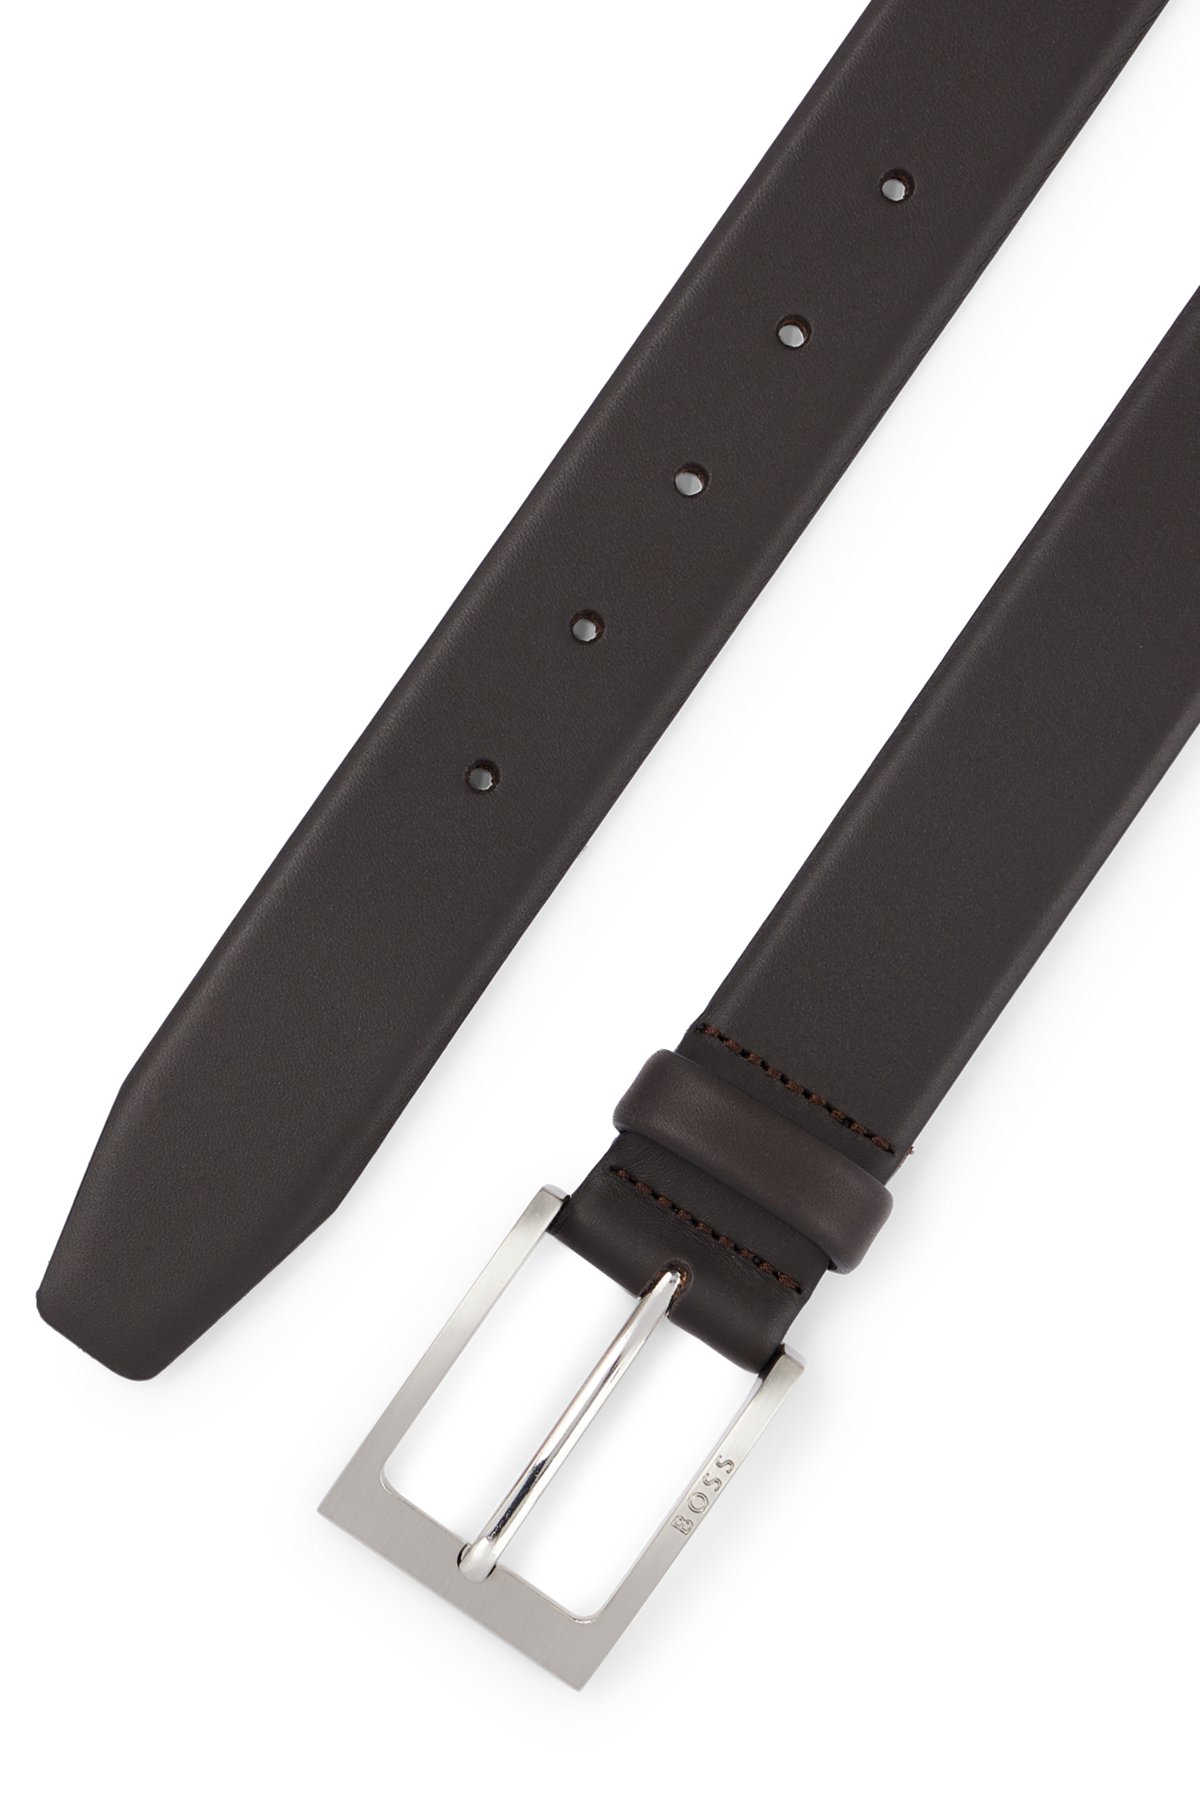 Nappa-leather belt with pin buckle, Dark Brown